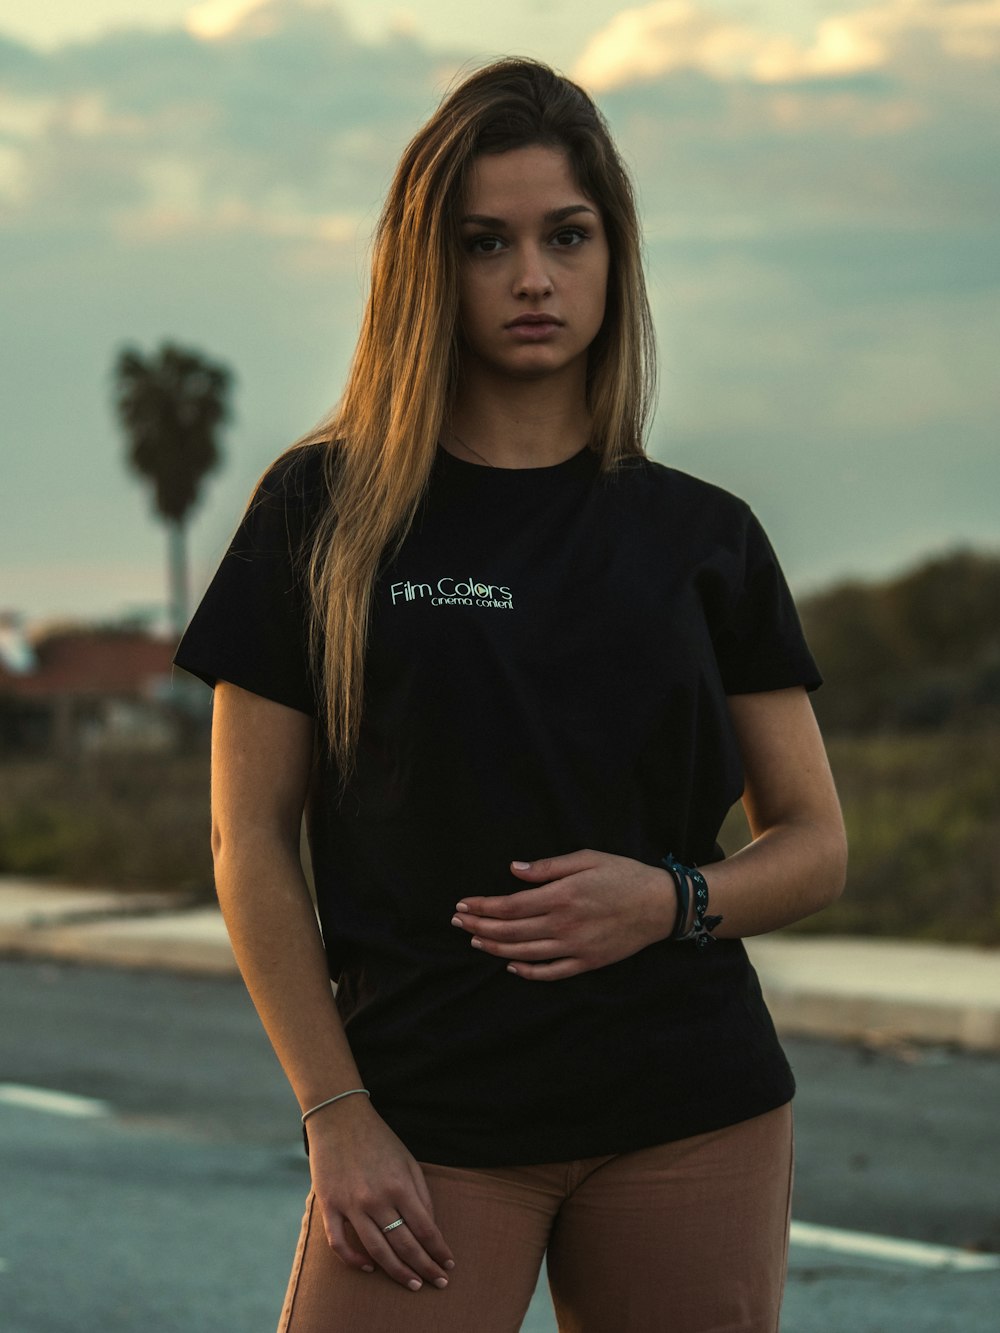 woman in black crew neck t-shirt standing on road during daytime